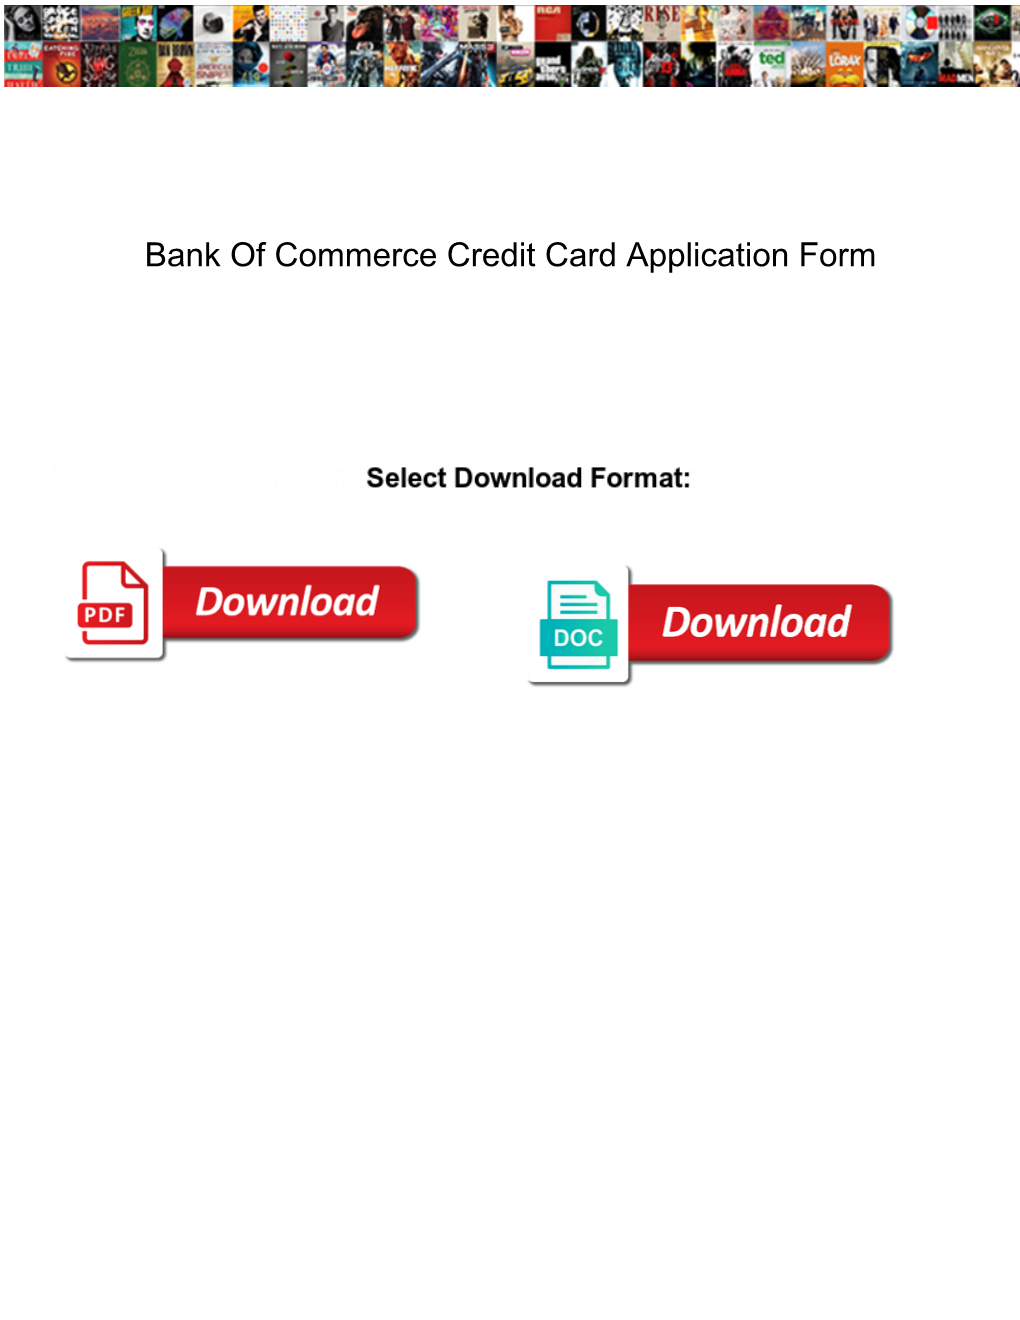 Bank of Commerce Credit Card Application Form